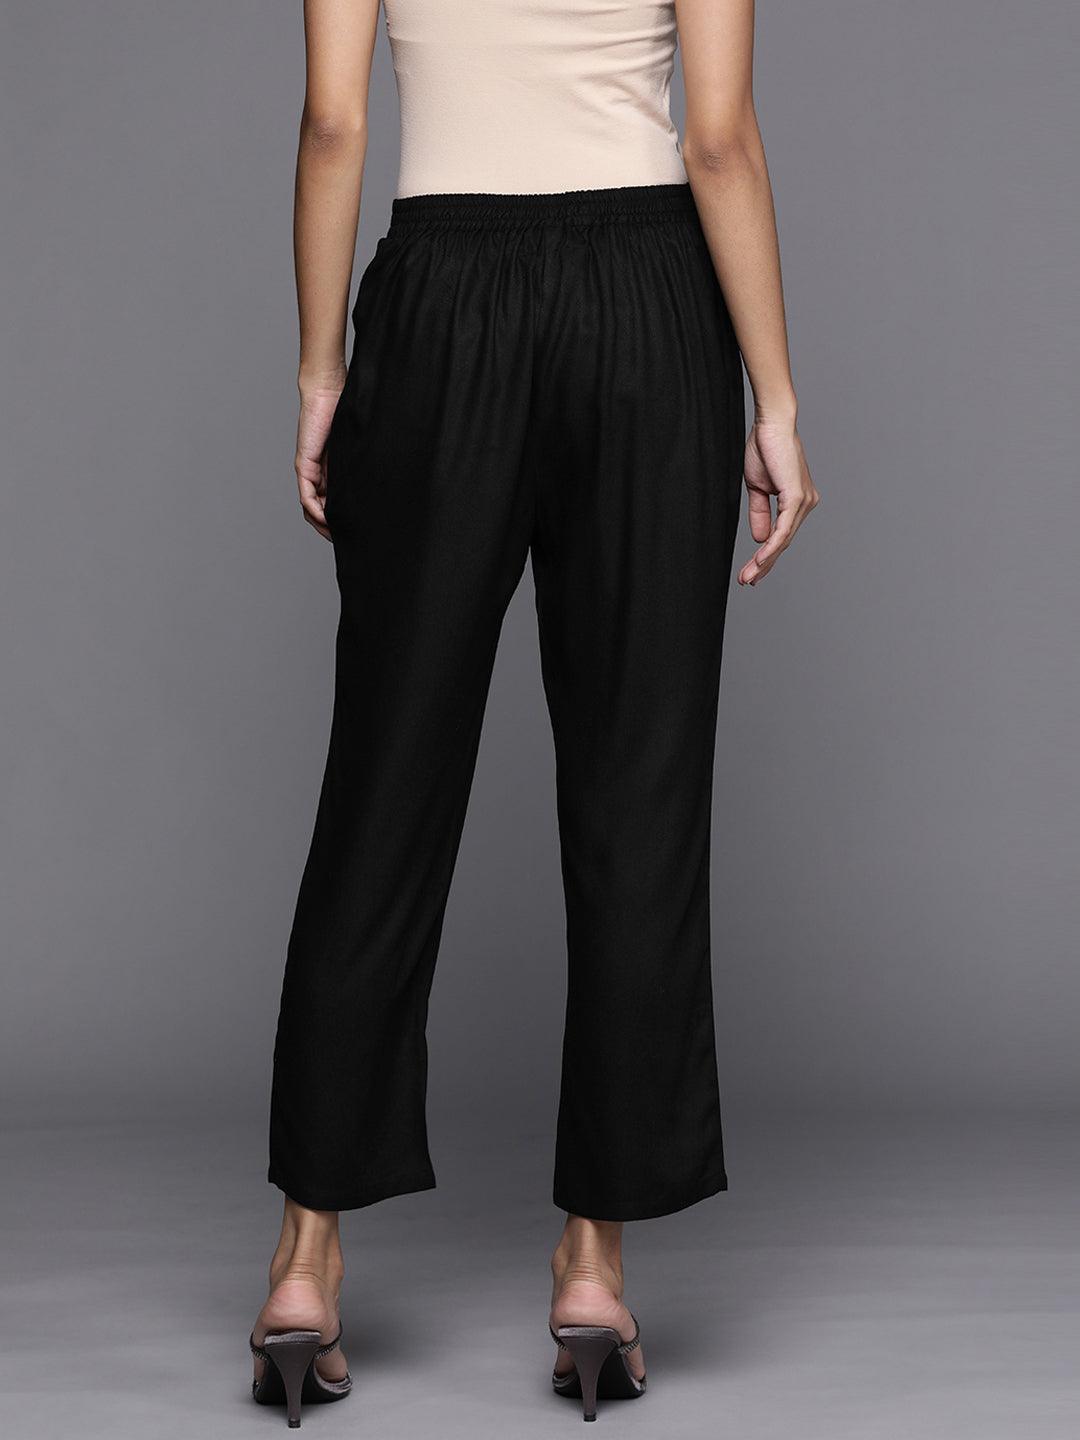 Black Solid Pashmina Wool Trousers - Libas